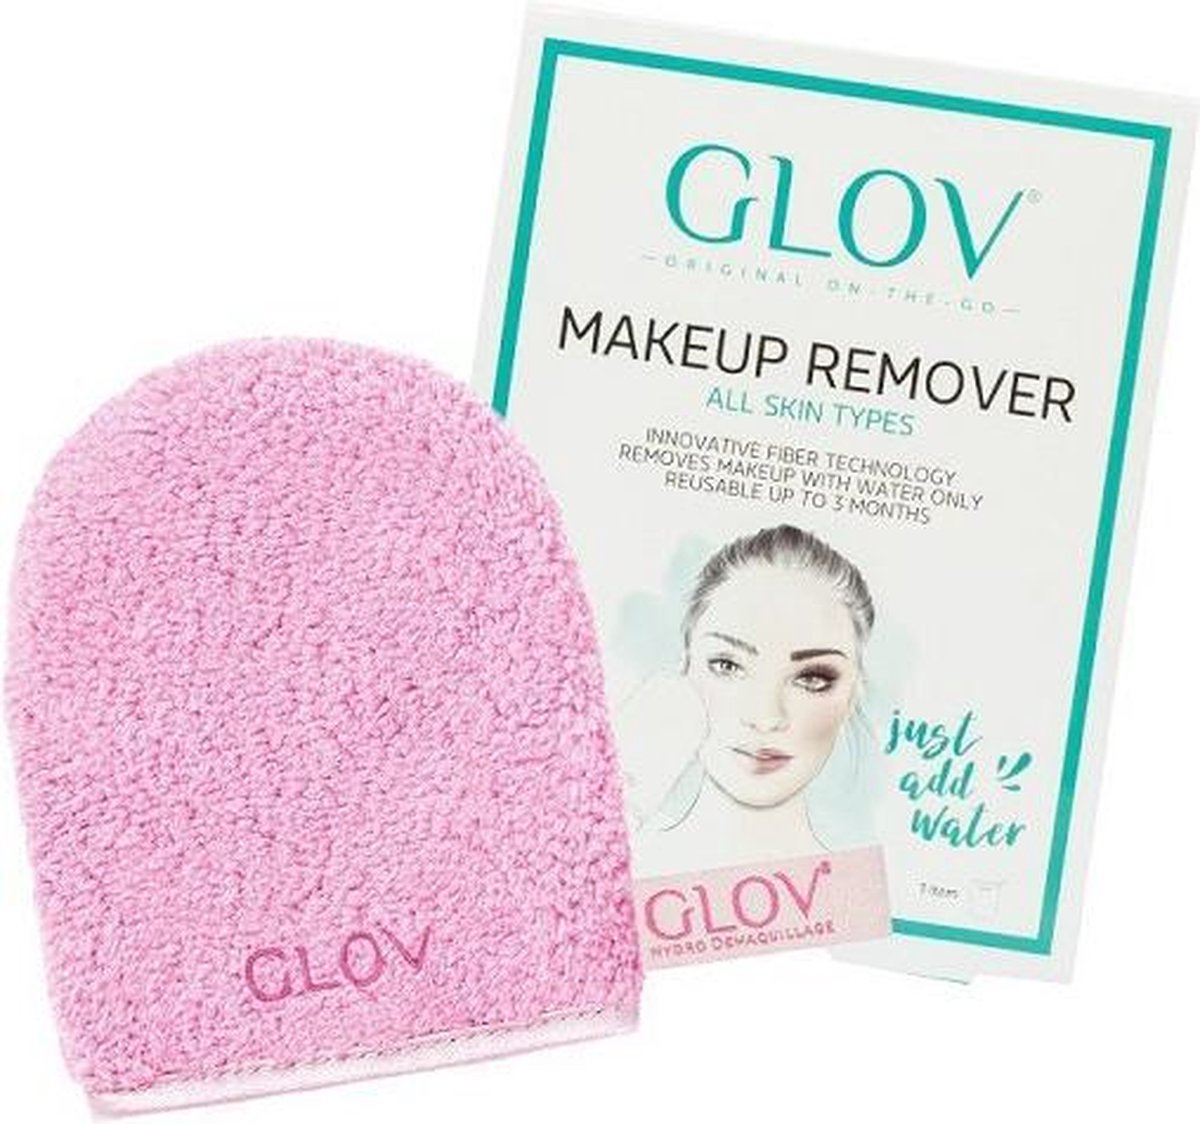 Glov - On-The-Go Makeup Remover Glove Is A Make-Up Remover Cozy Rose